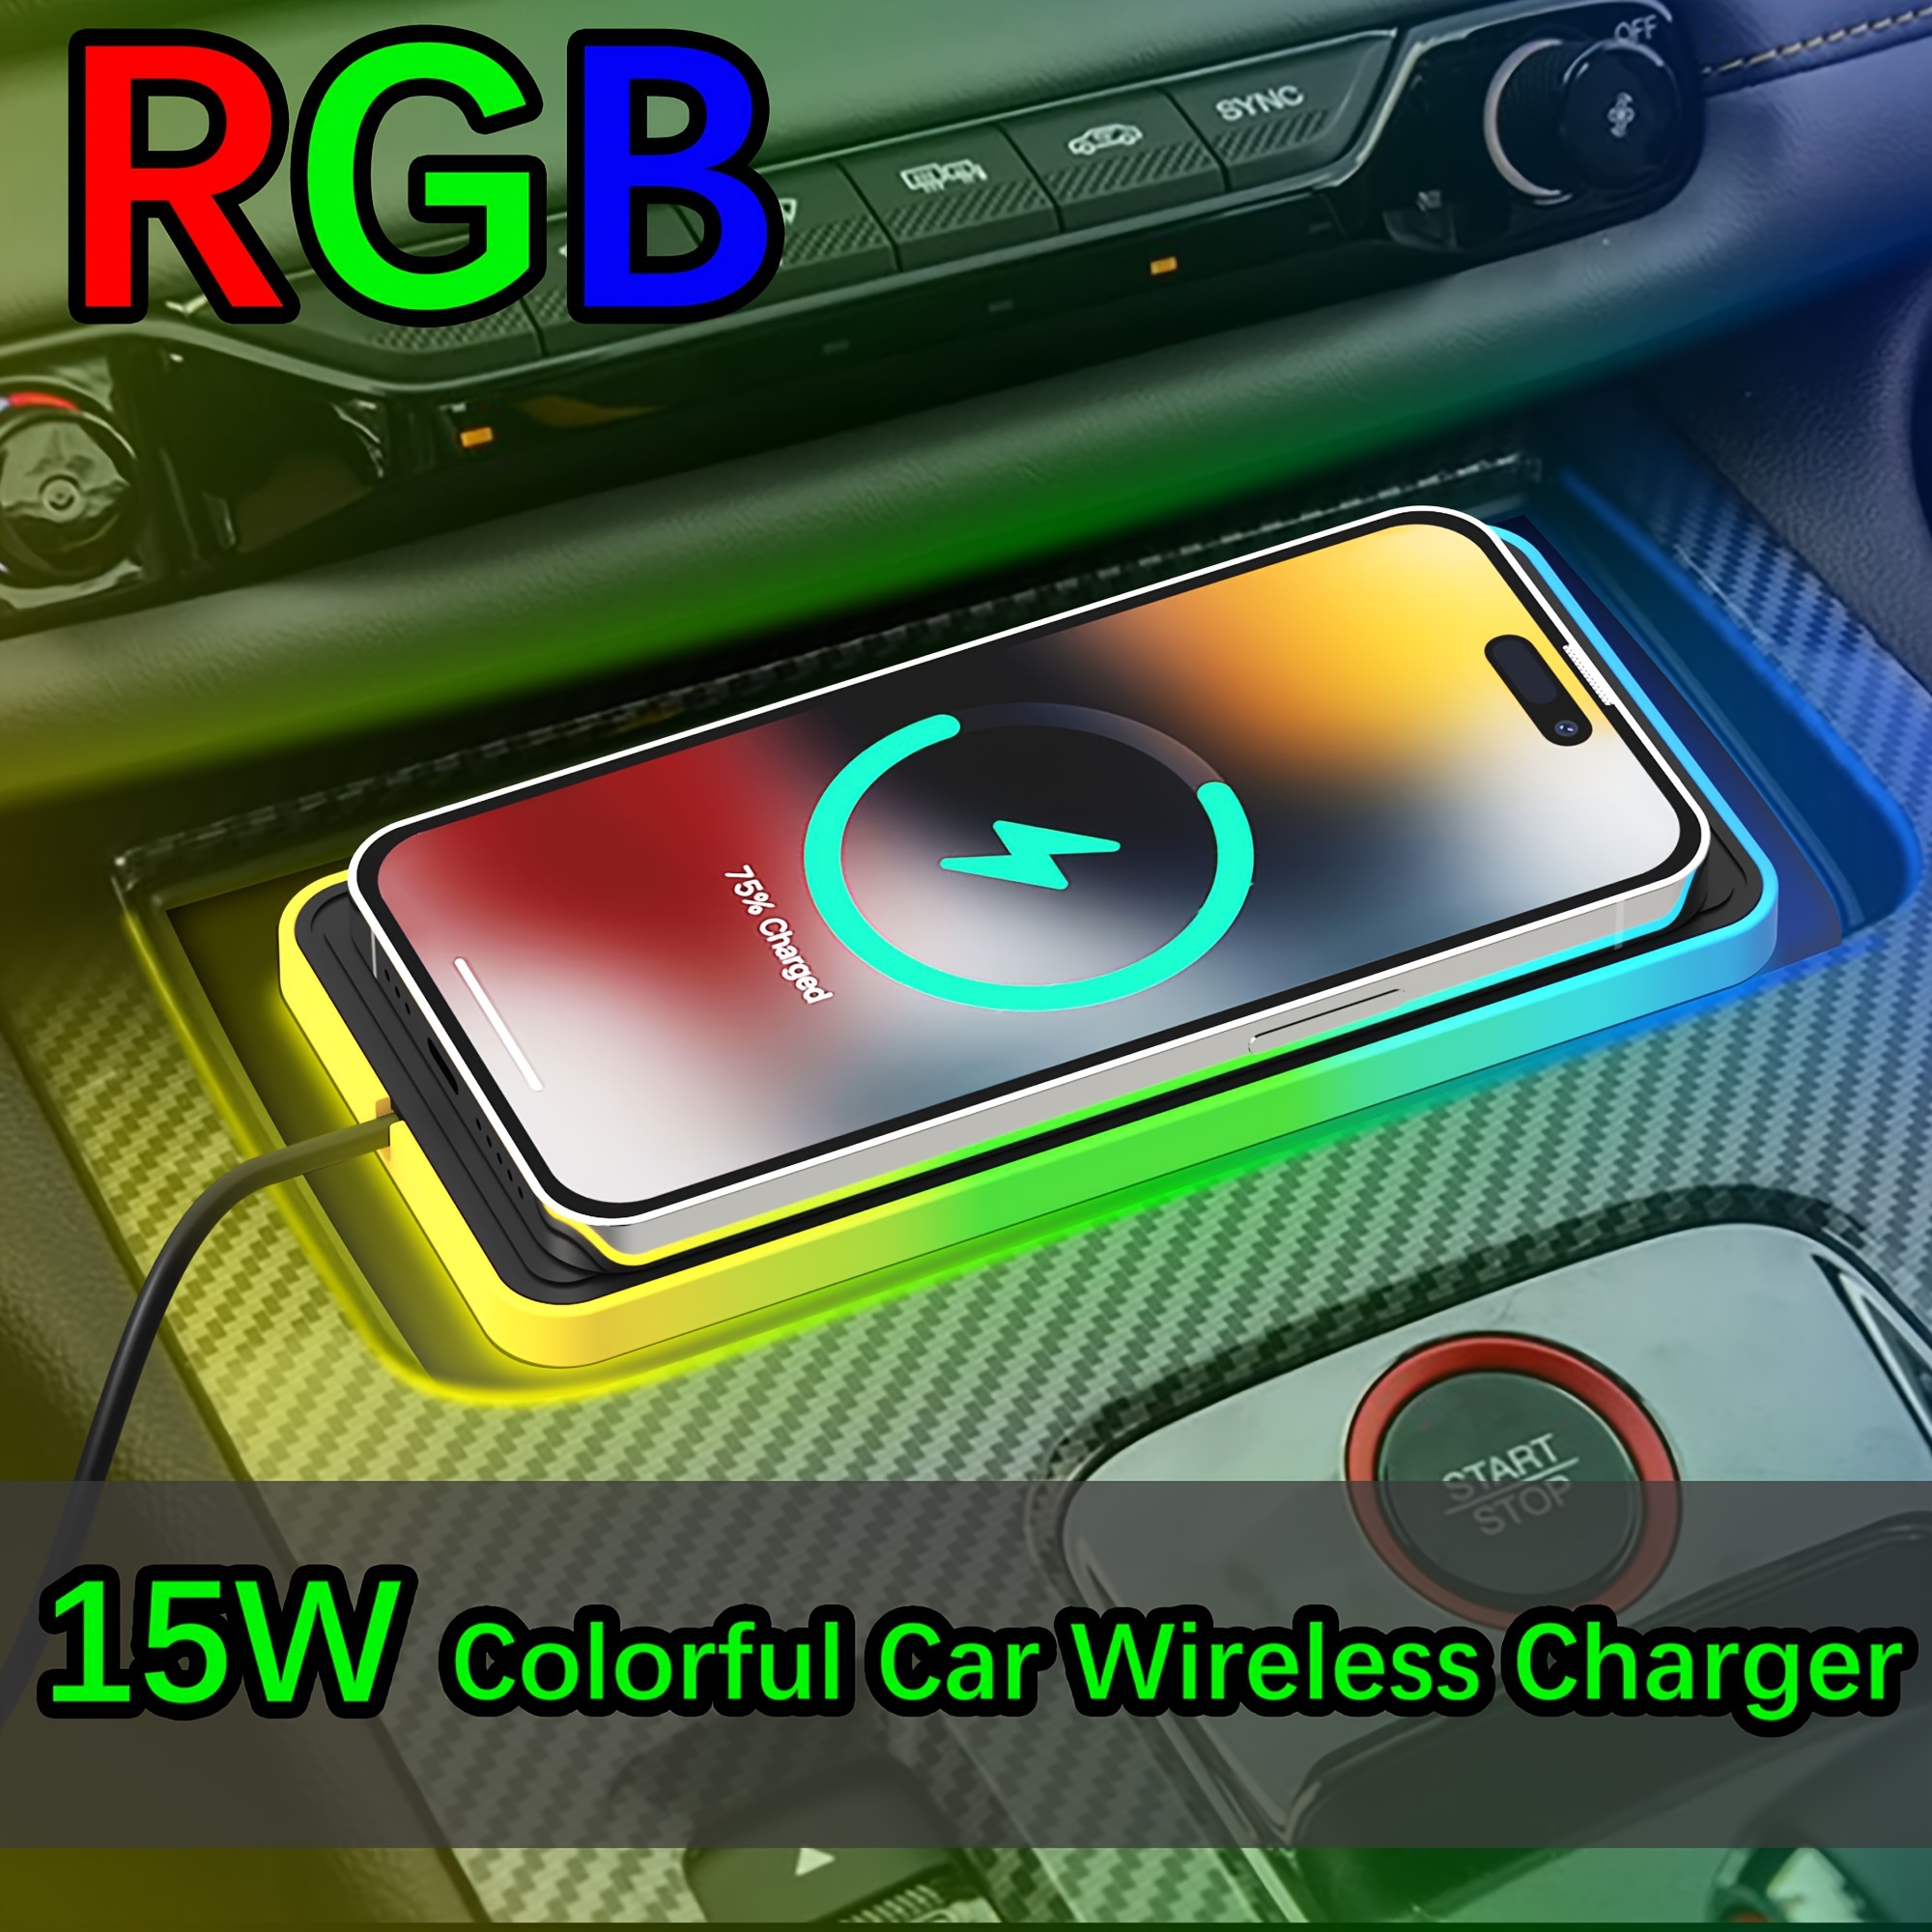 

Rgb Colorful Car Wireless Charger Anti Slip Charging Board Wireless Charging Station Suitable For 15, 14, 13, 12, Samsung, , Xiaomi, 15w Car Fast Phone Charging Car Atmosphere Light